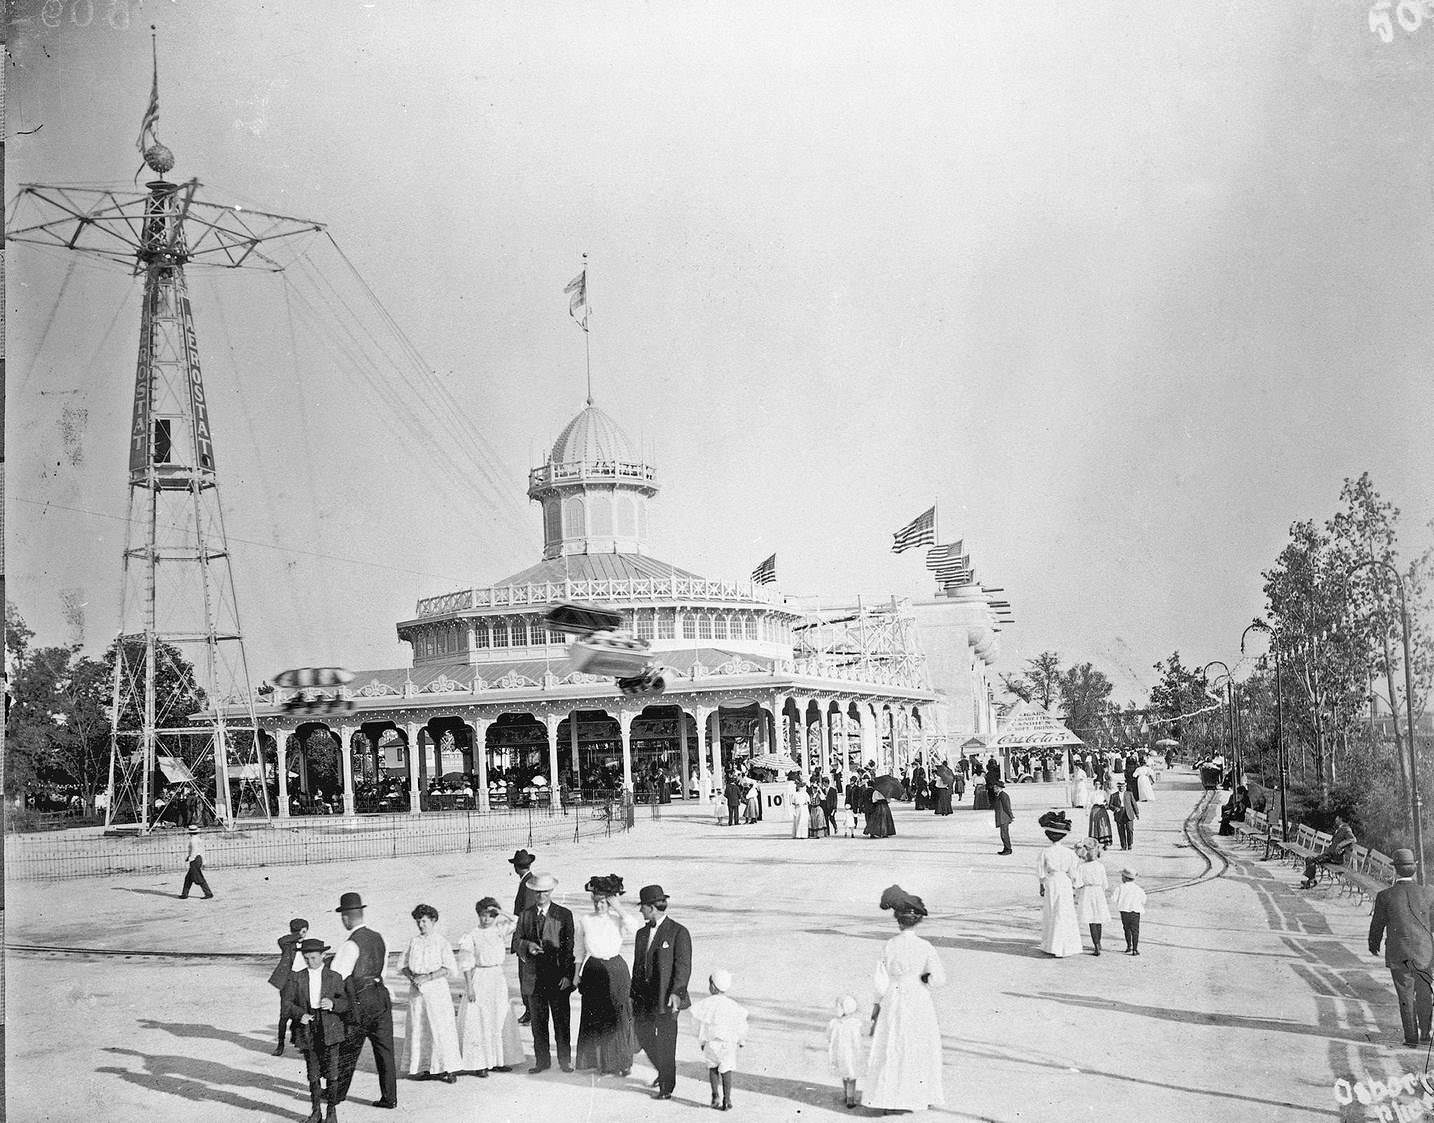 Scene at Riverview amusement park with carousel in background, Chicago, Illinois, 1910s.